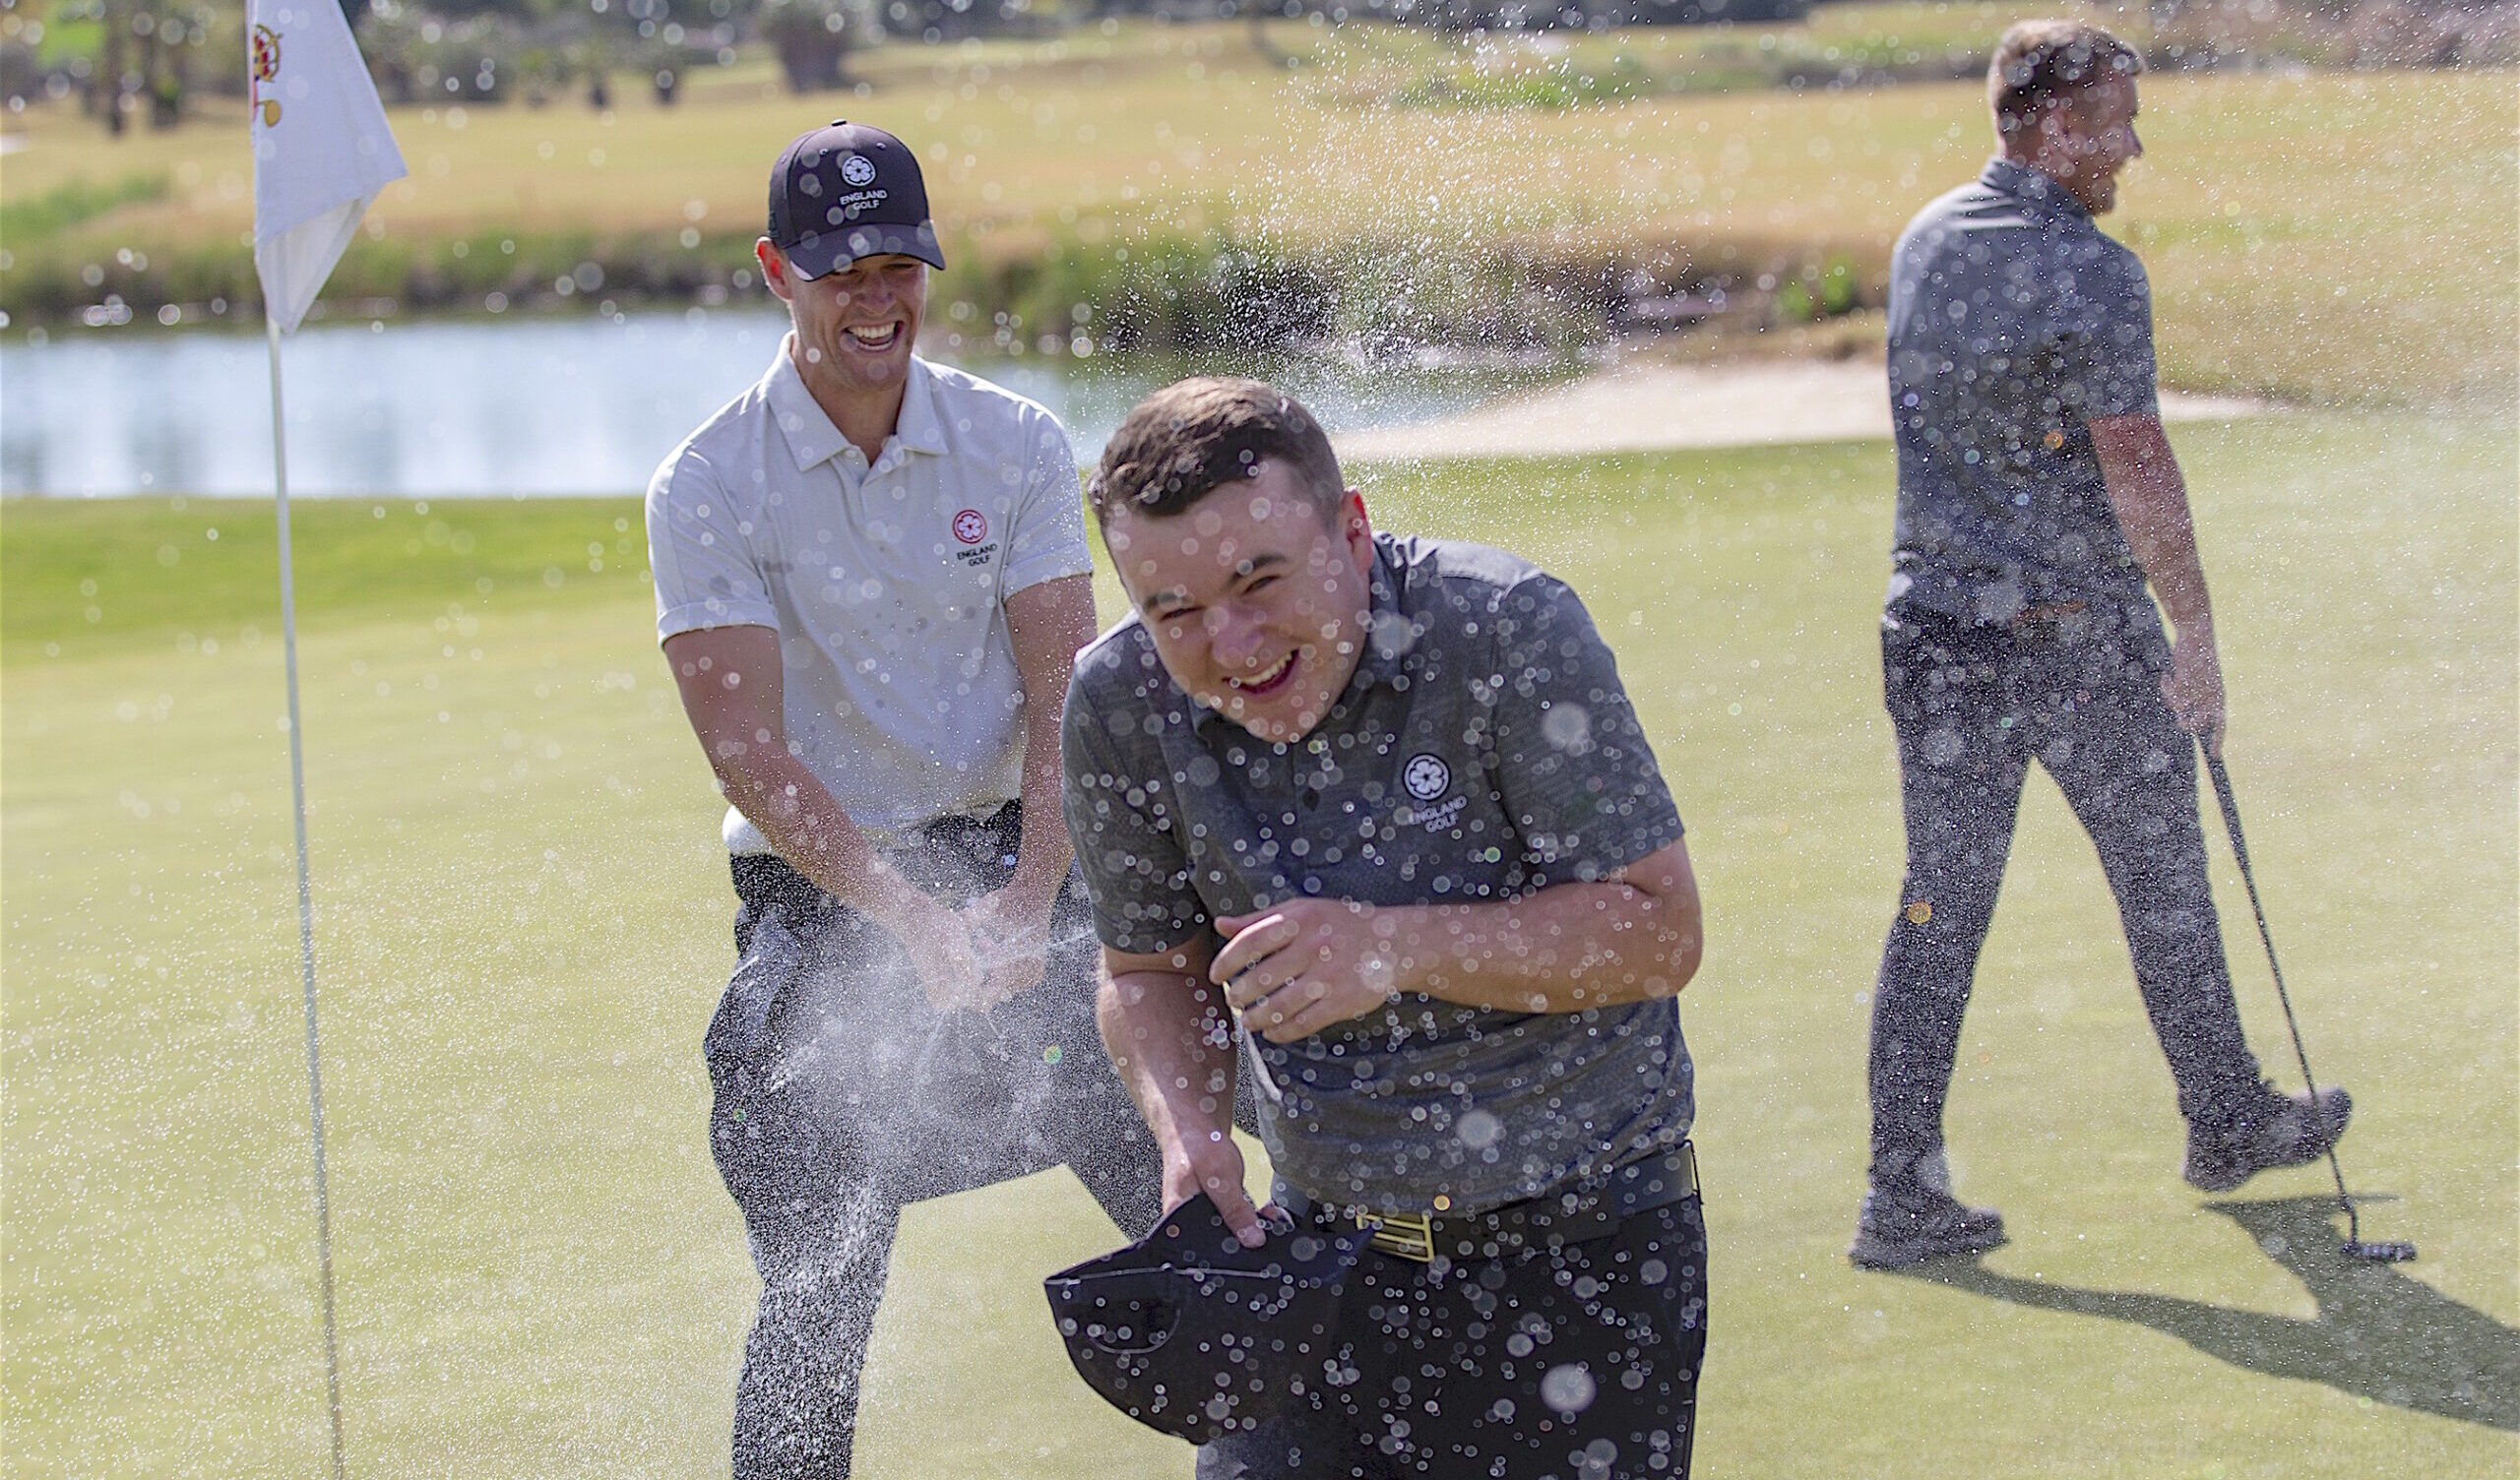 Spanish Amateur champion John Gough is doused in champagne by his England team-mate Callan Barrow